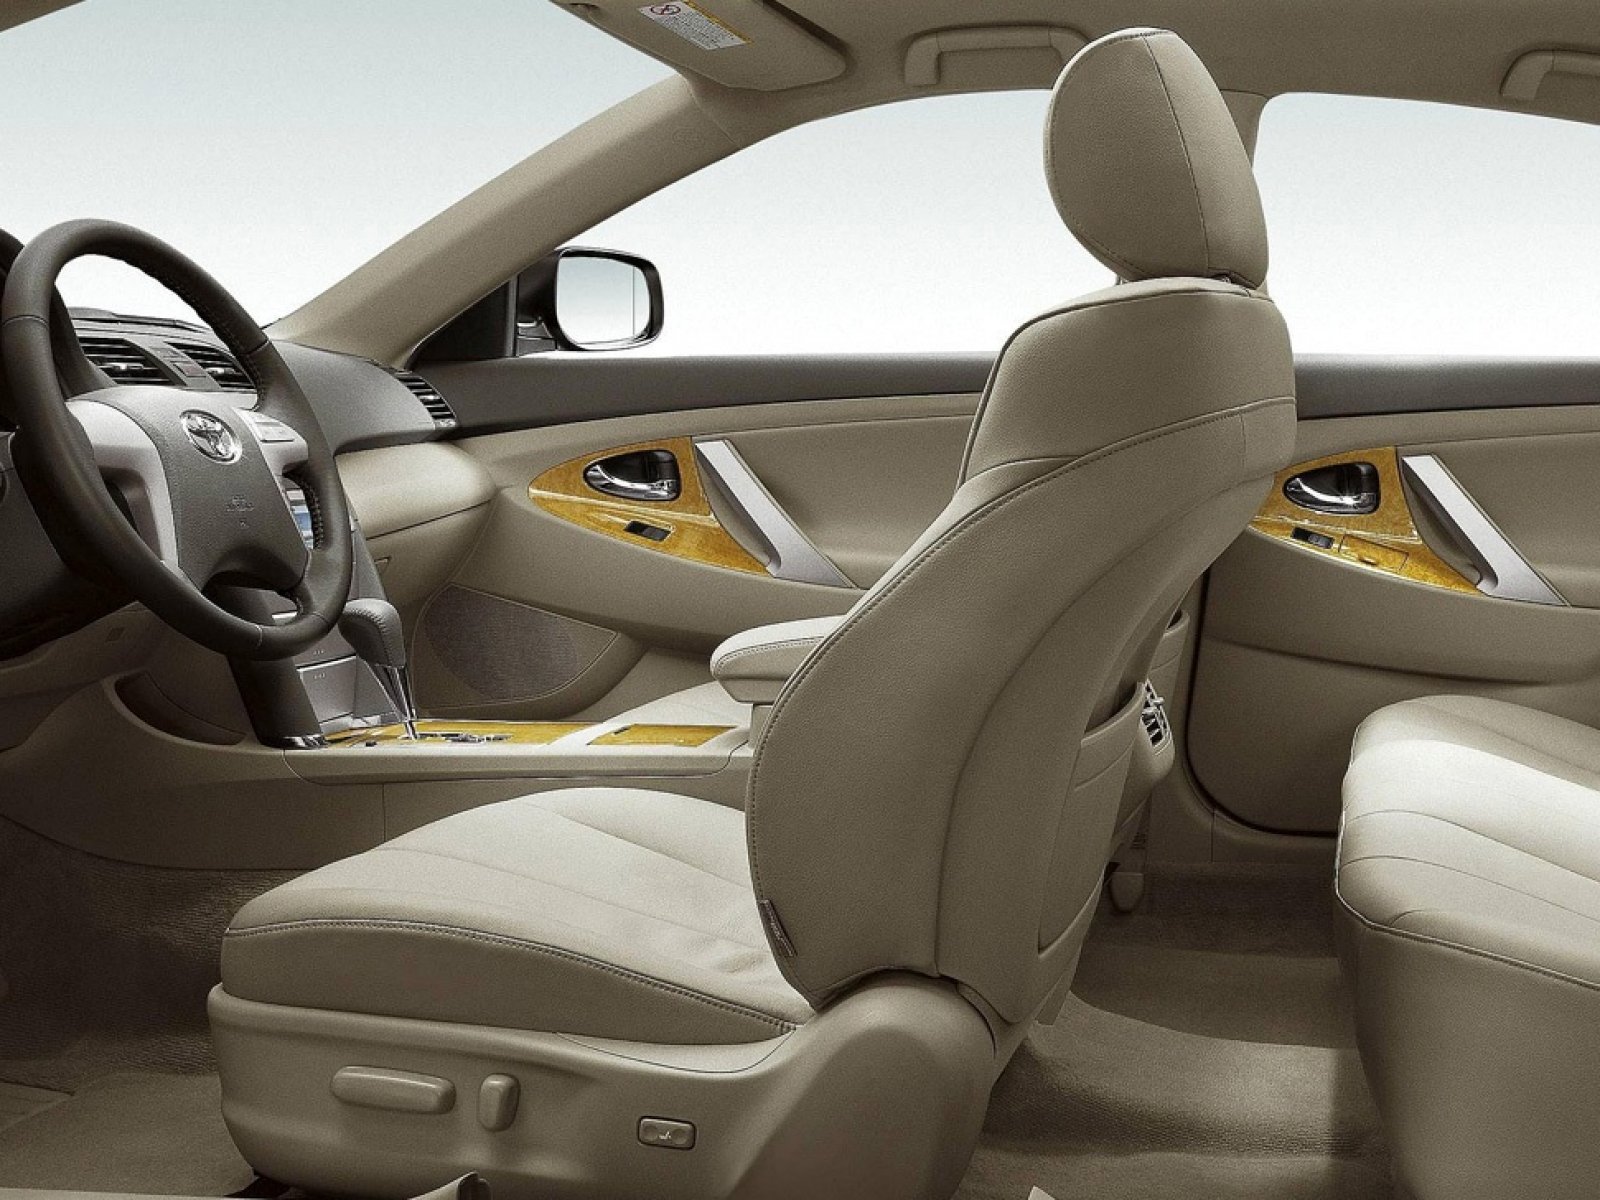 Toyota Camry Is The Business Class Car By Being Produced Since